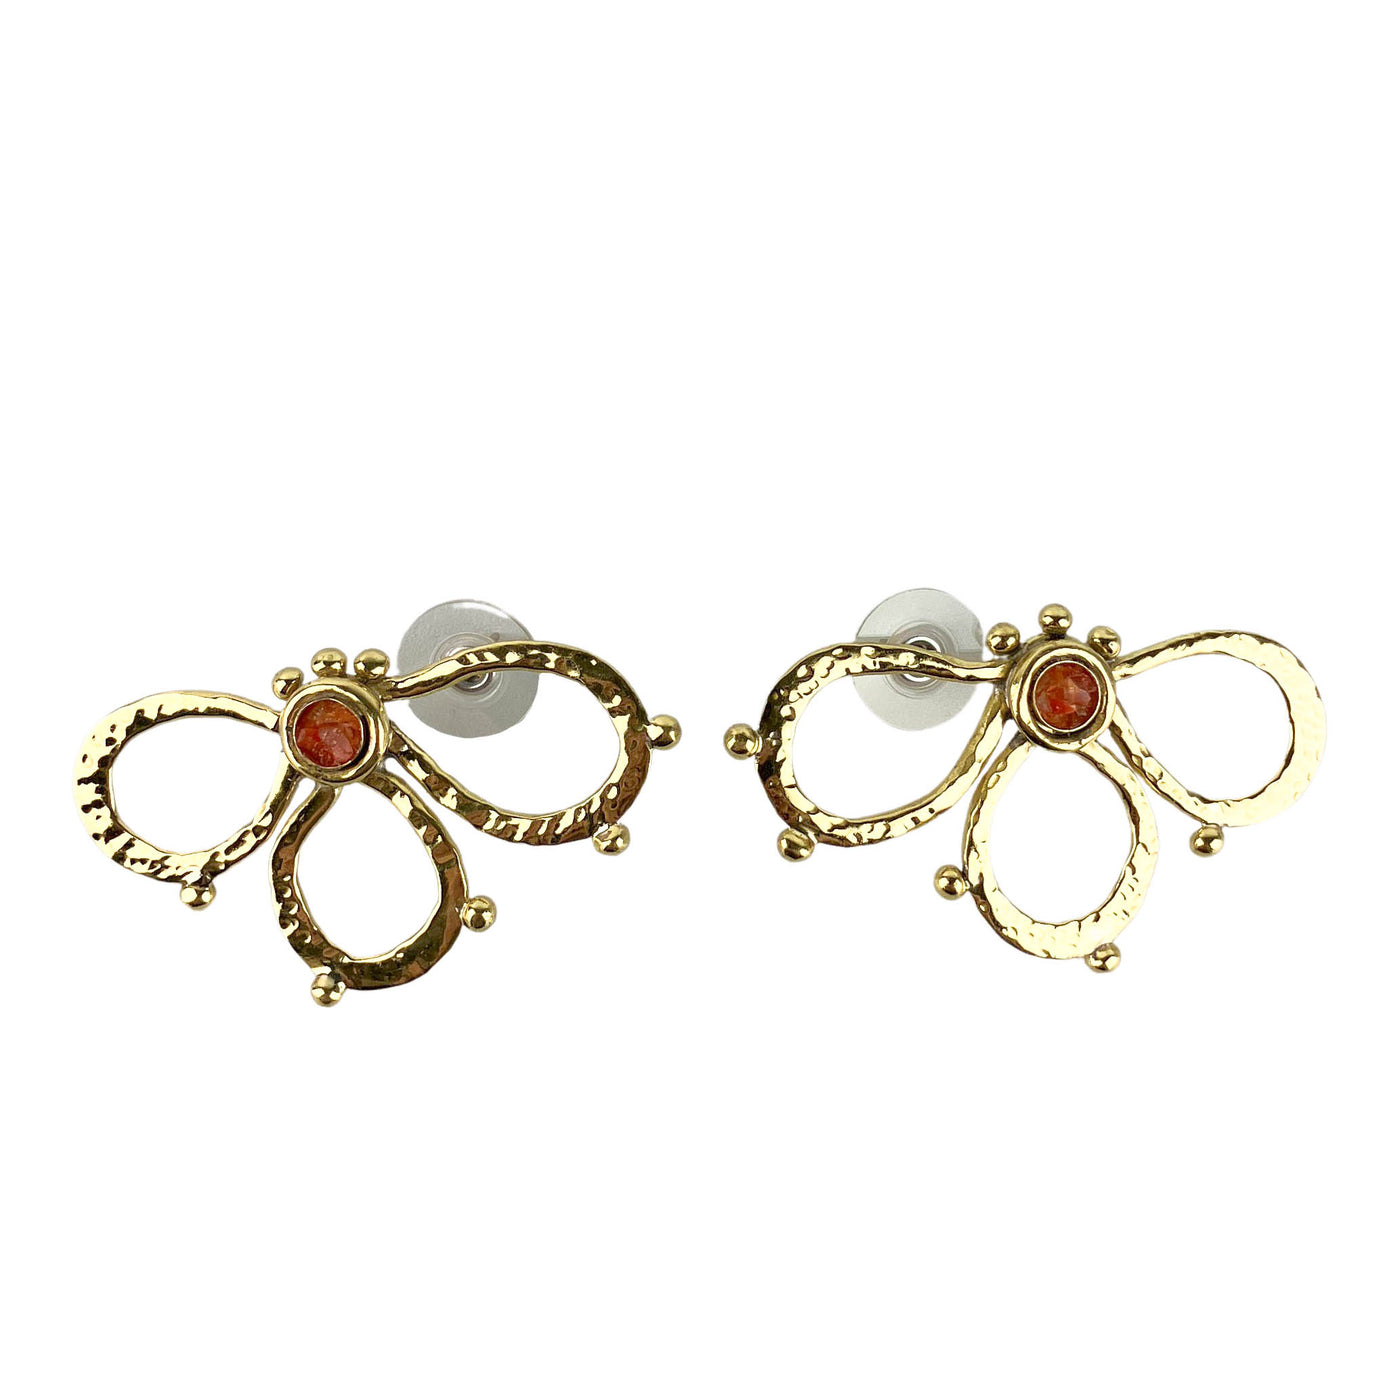 Ulla Johnson Hammered Chain Flower Stud Earrings in Tiger's Eye - Discounts on Ulla Johnson at UAL